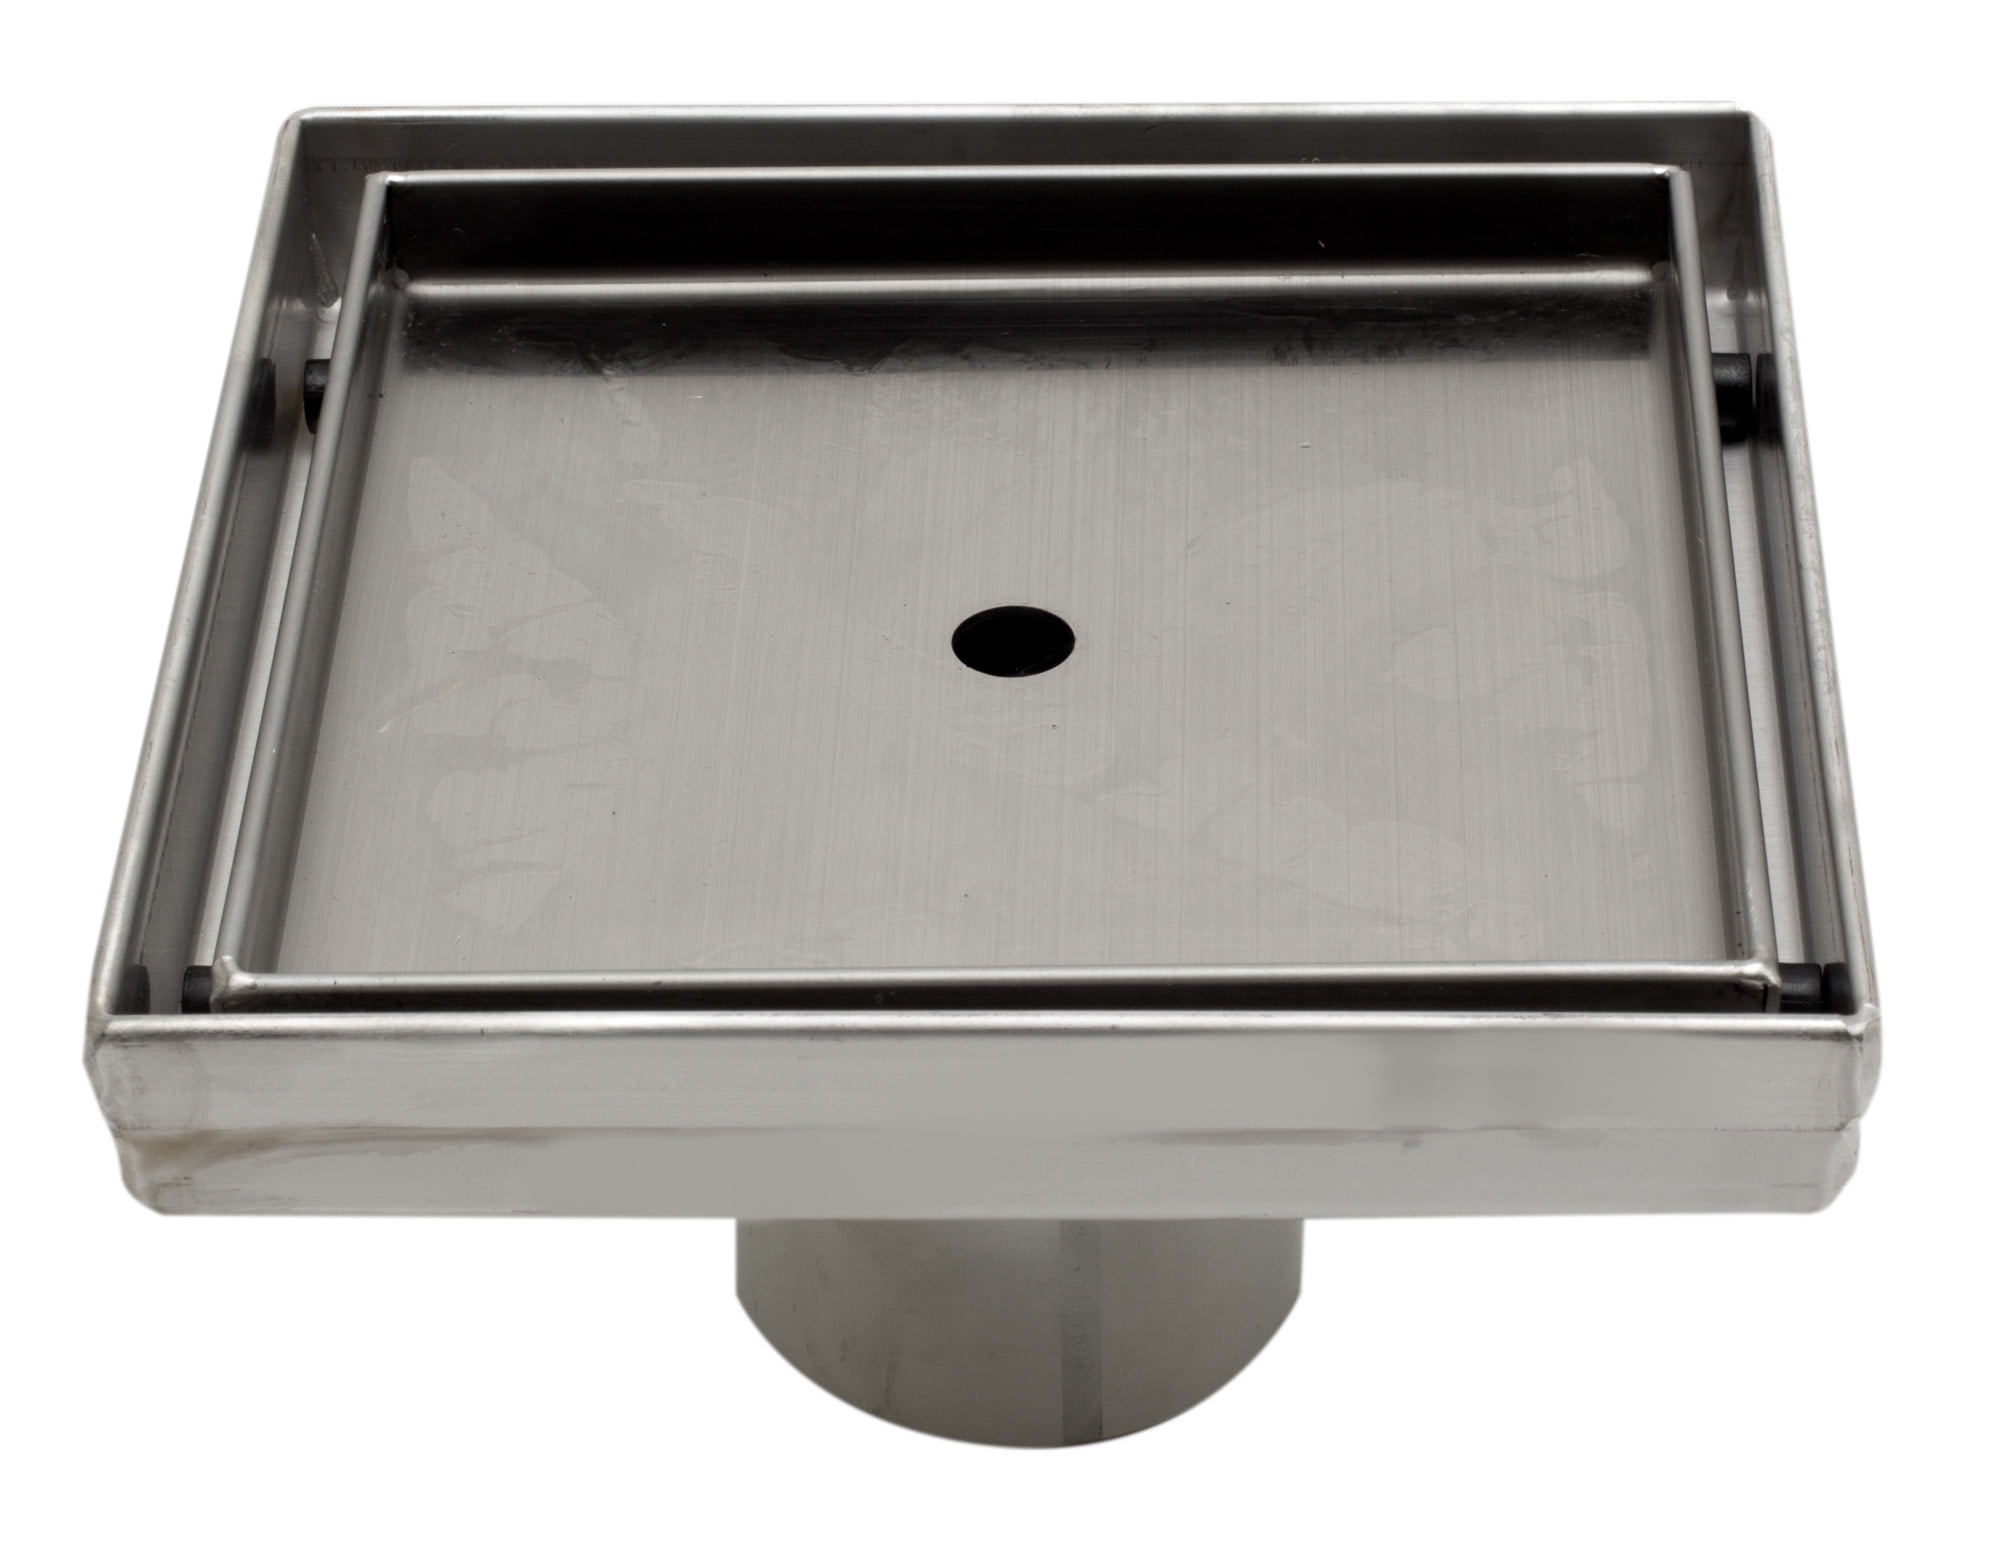 Absd55a 5 X 5 In. Modern Square Stainless Steel Shower Drain With Cover